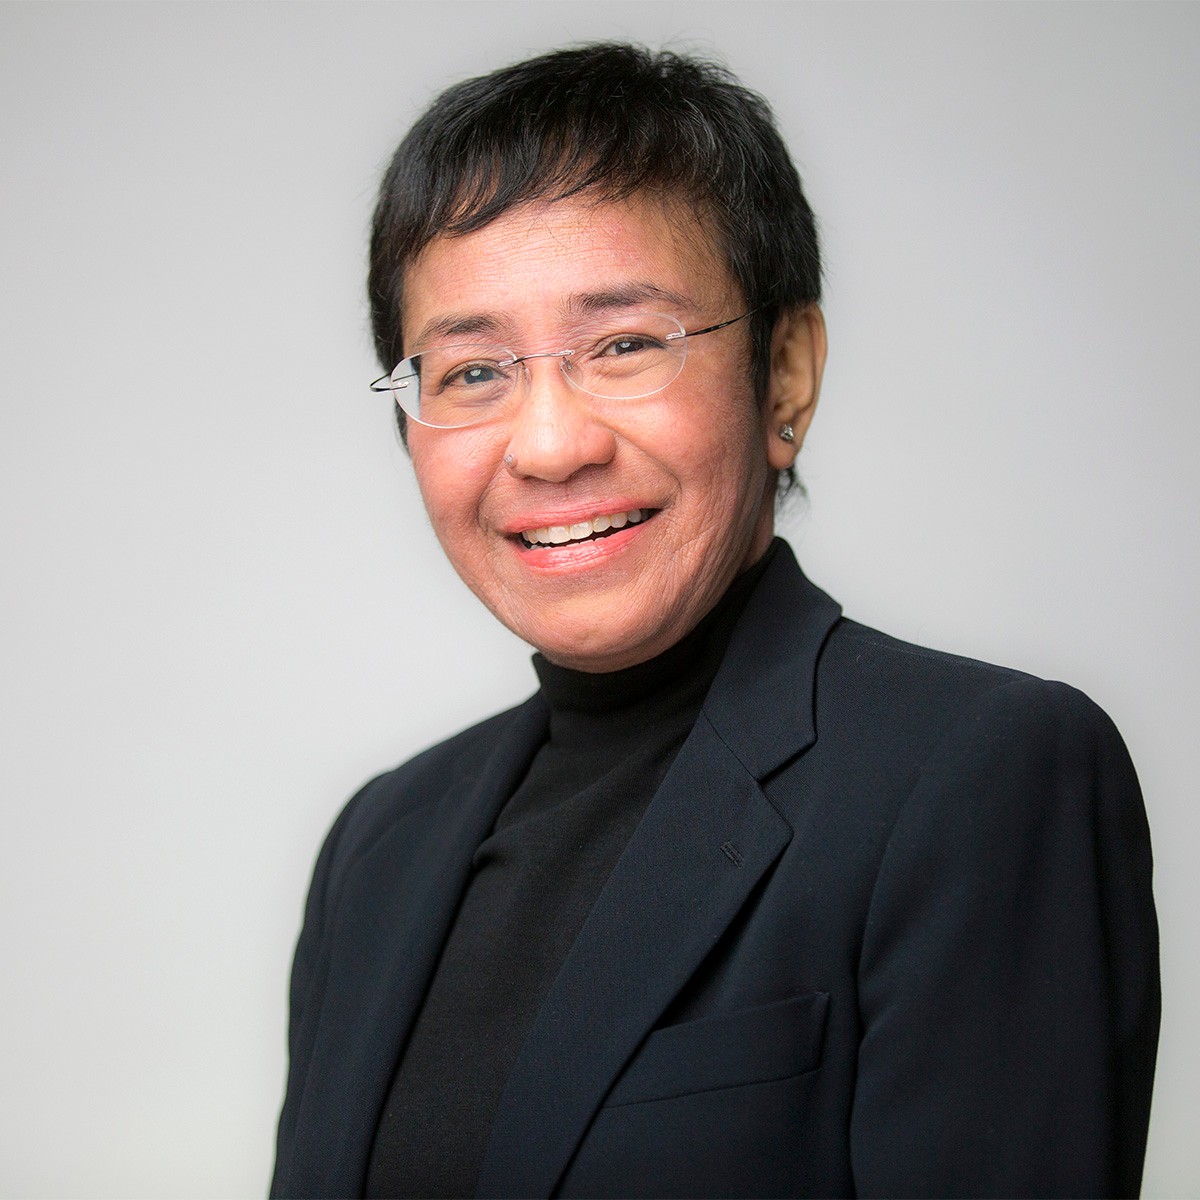 Maria Ressa bio photo shows Ressa smiling on a light grey background while looking toward the camera